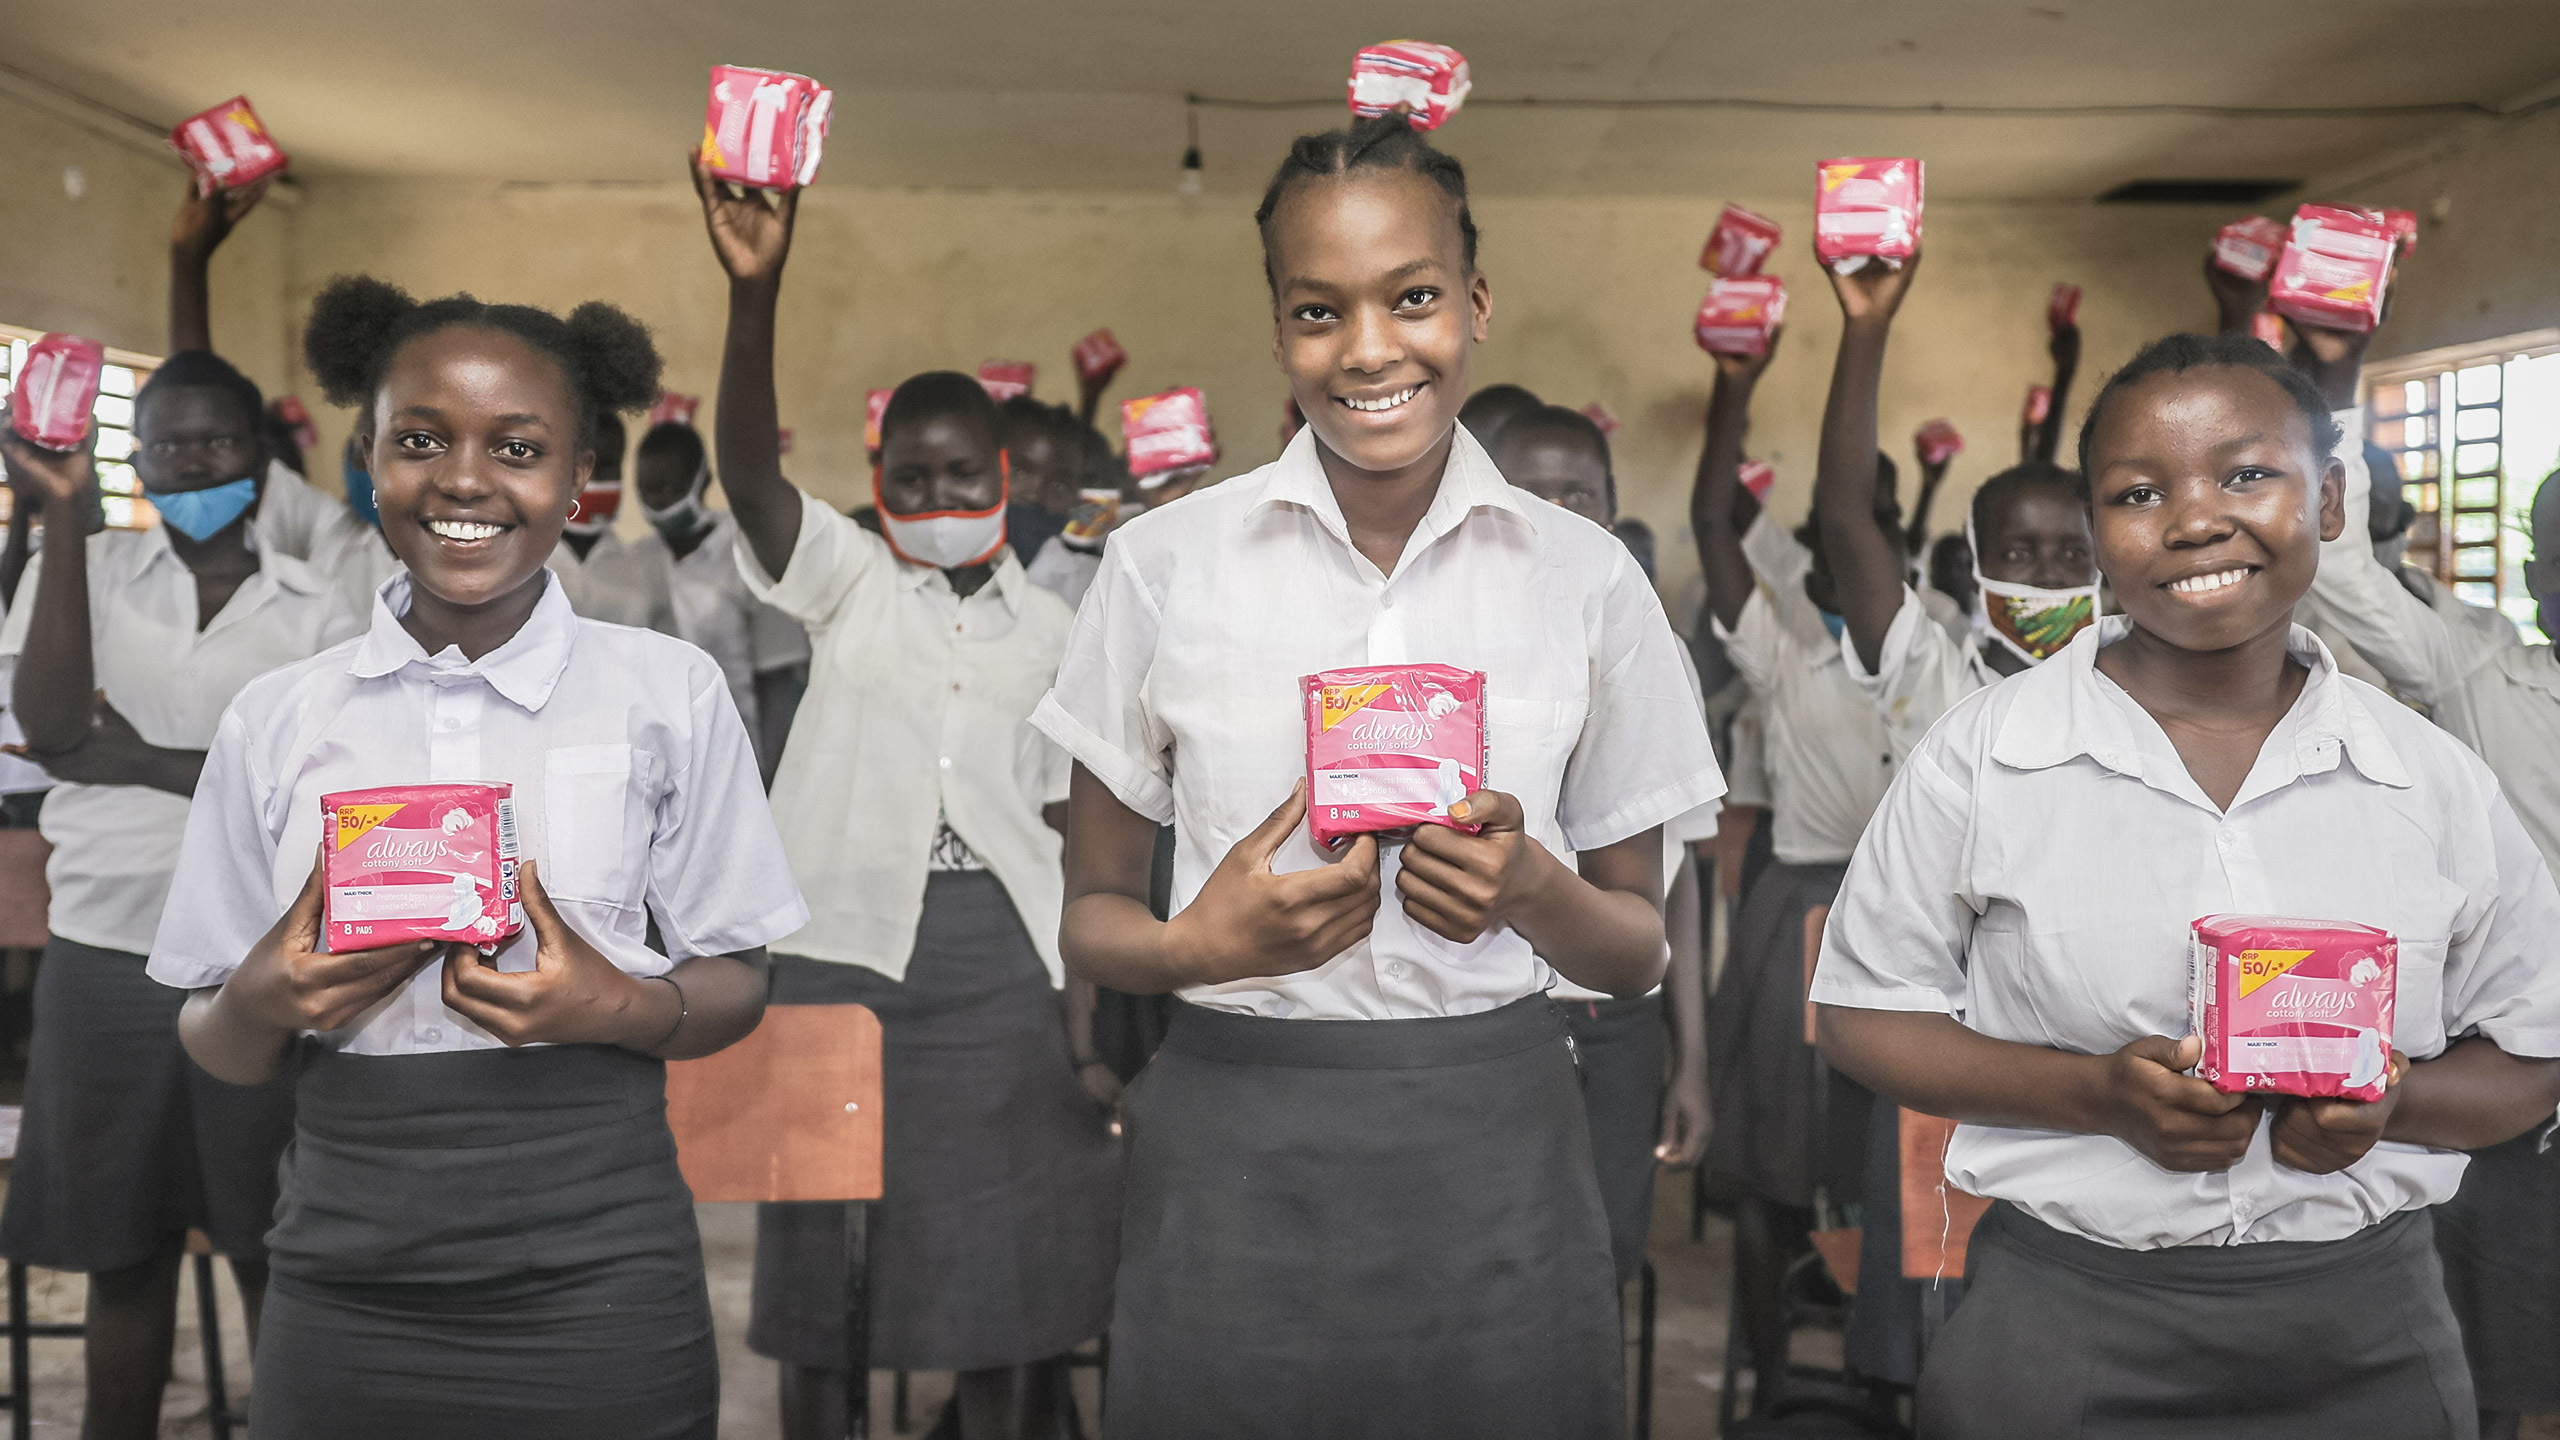 A menstrual hygiene kit from school may secure a girl’s access to education